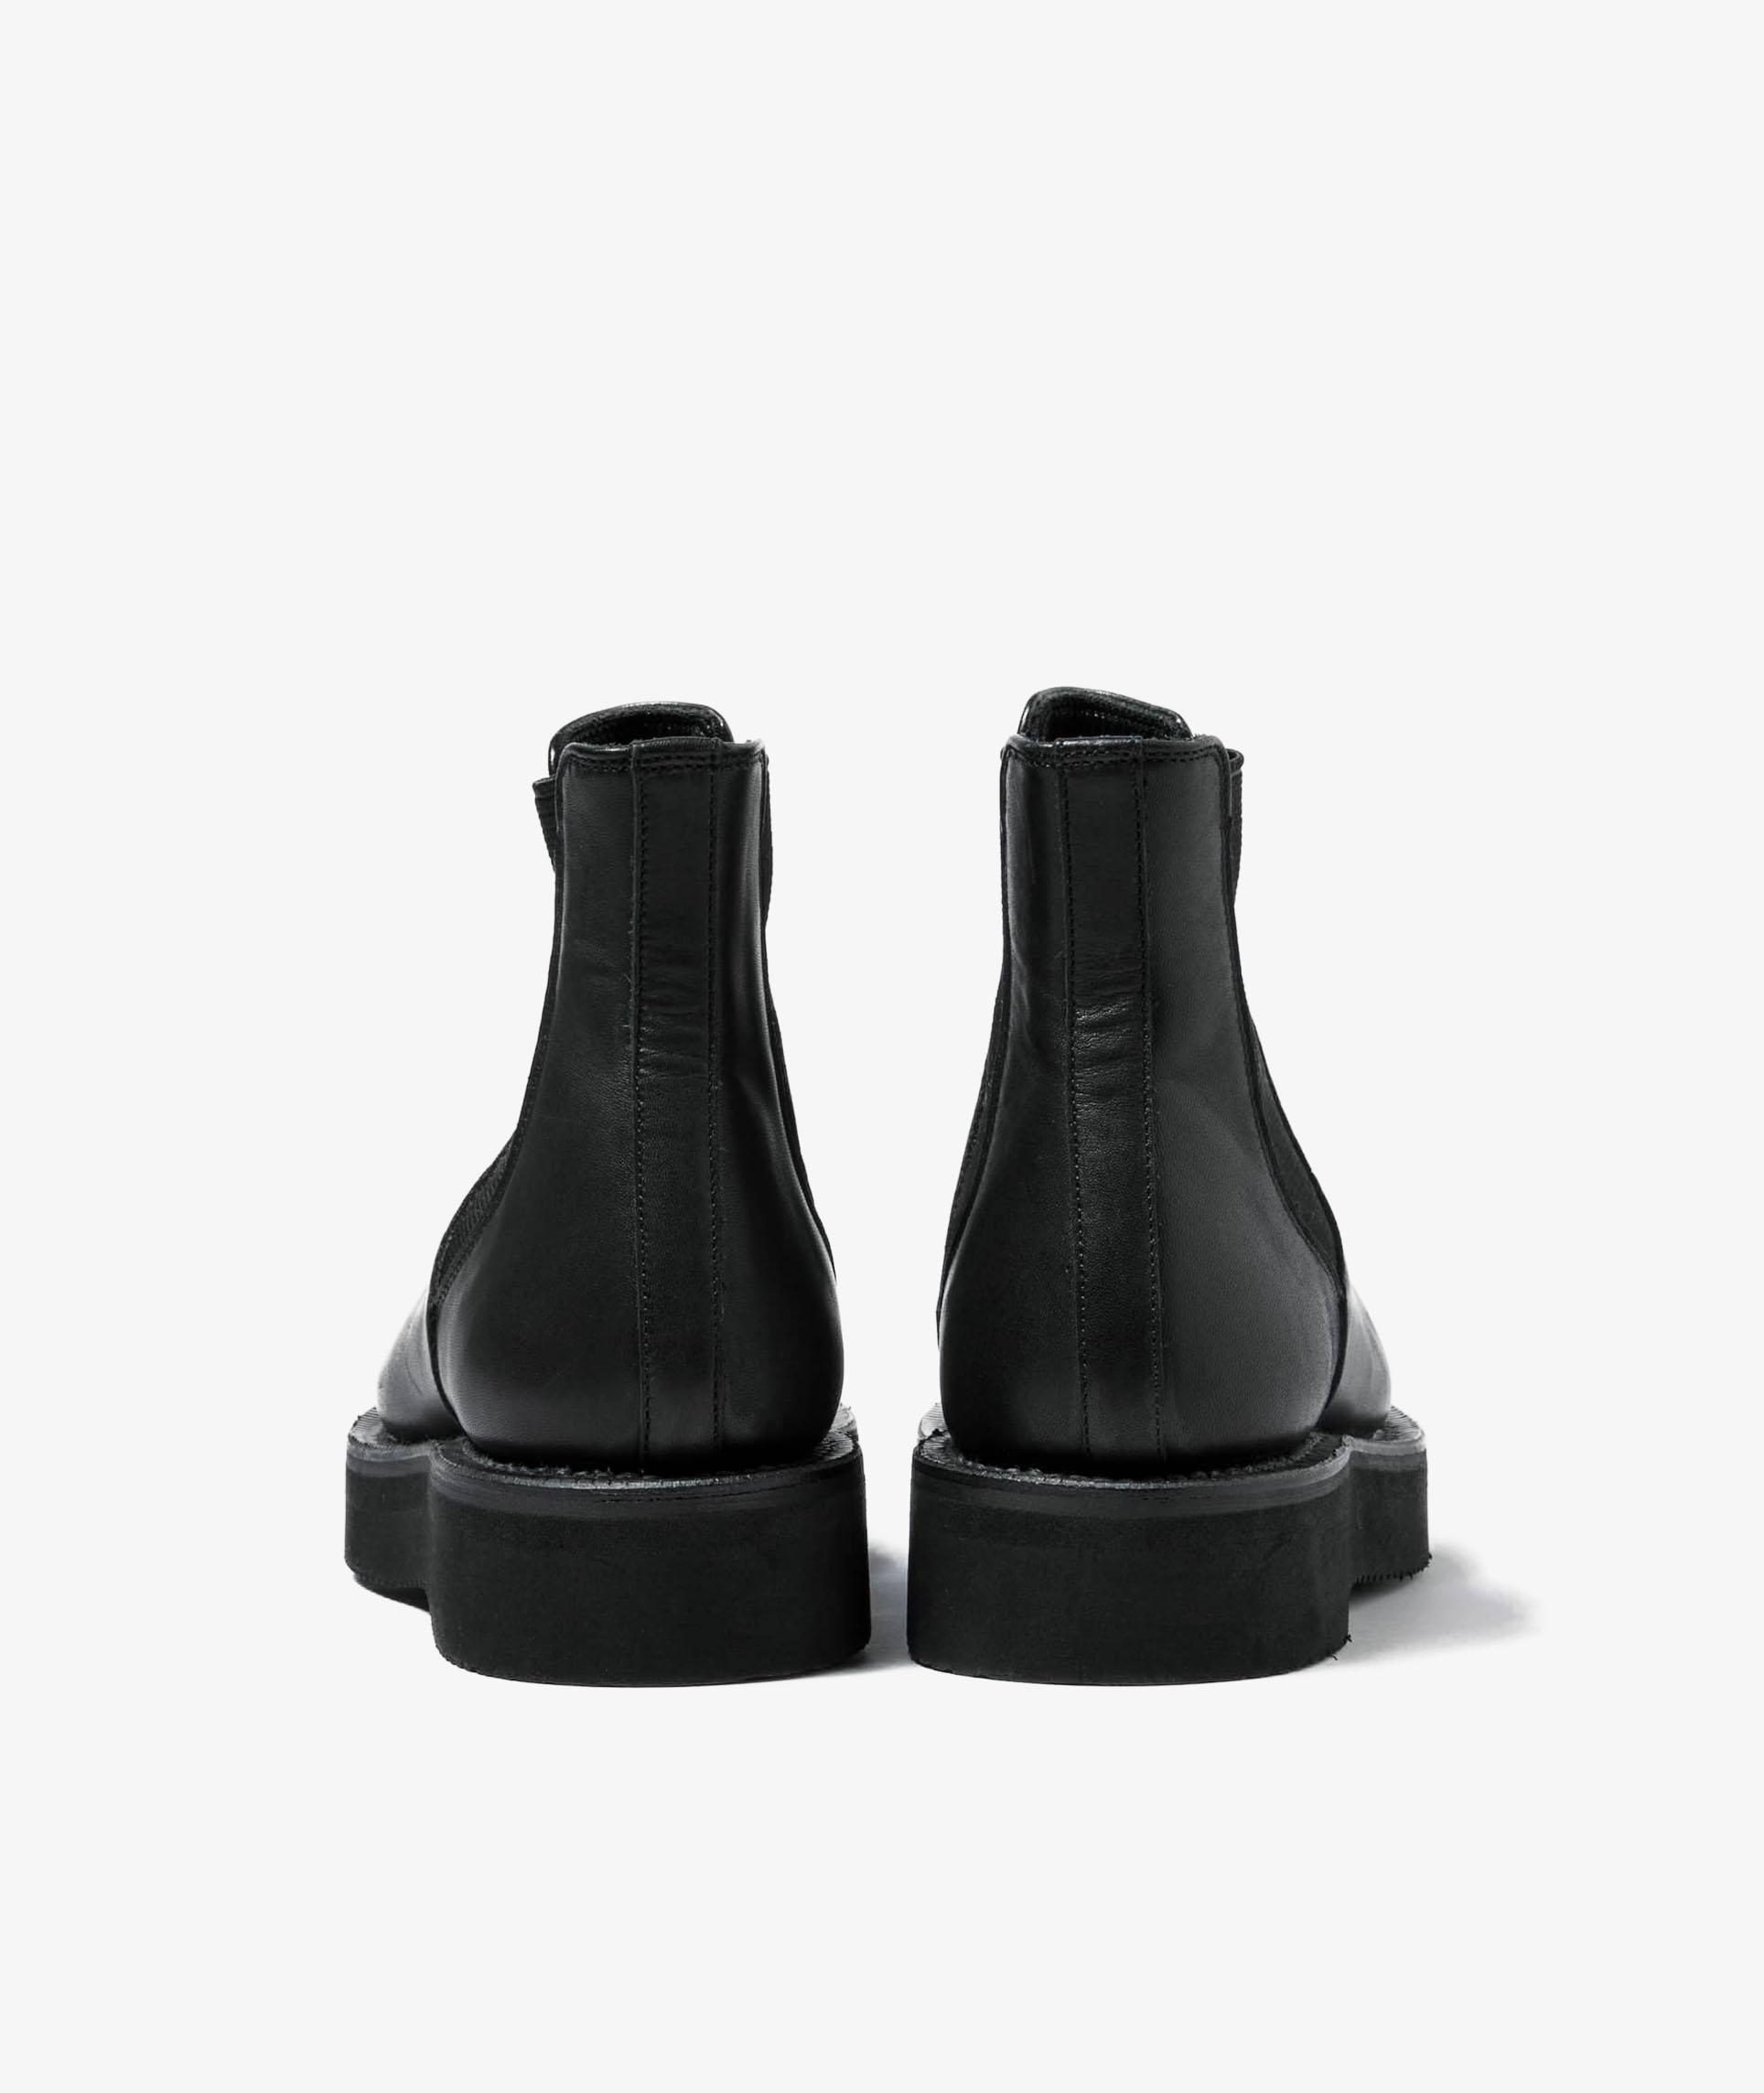 Norse Store | Shipping Worldwide - Auralee LEATHER SQUARE BOOTS MADE BY ...